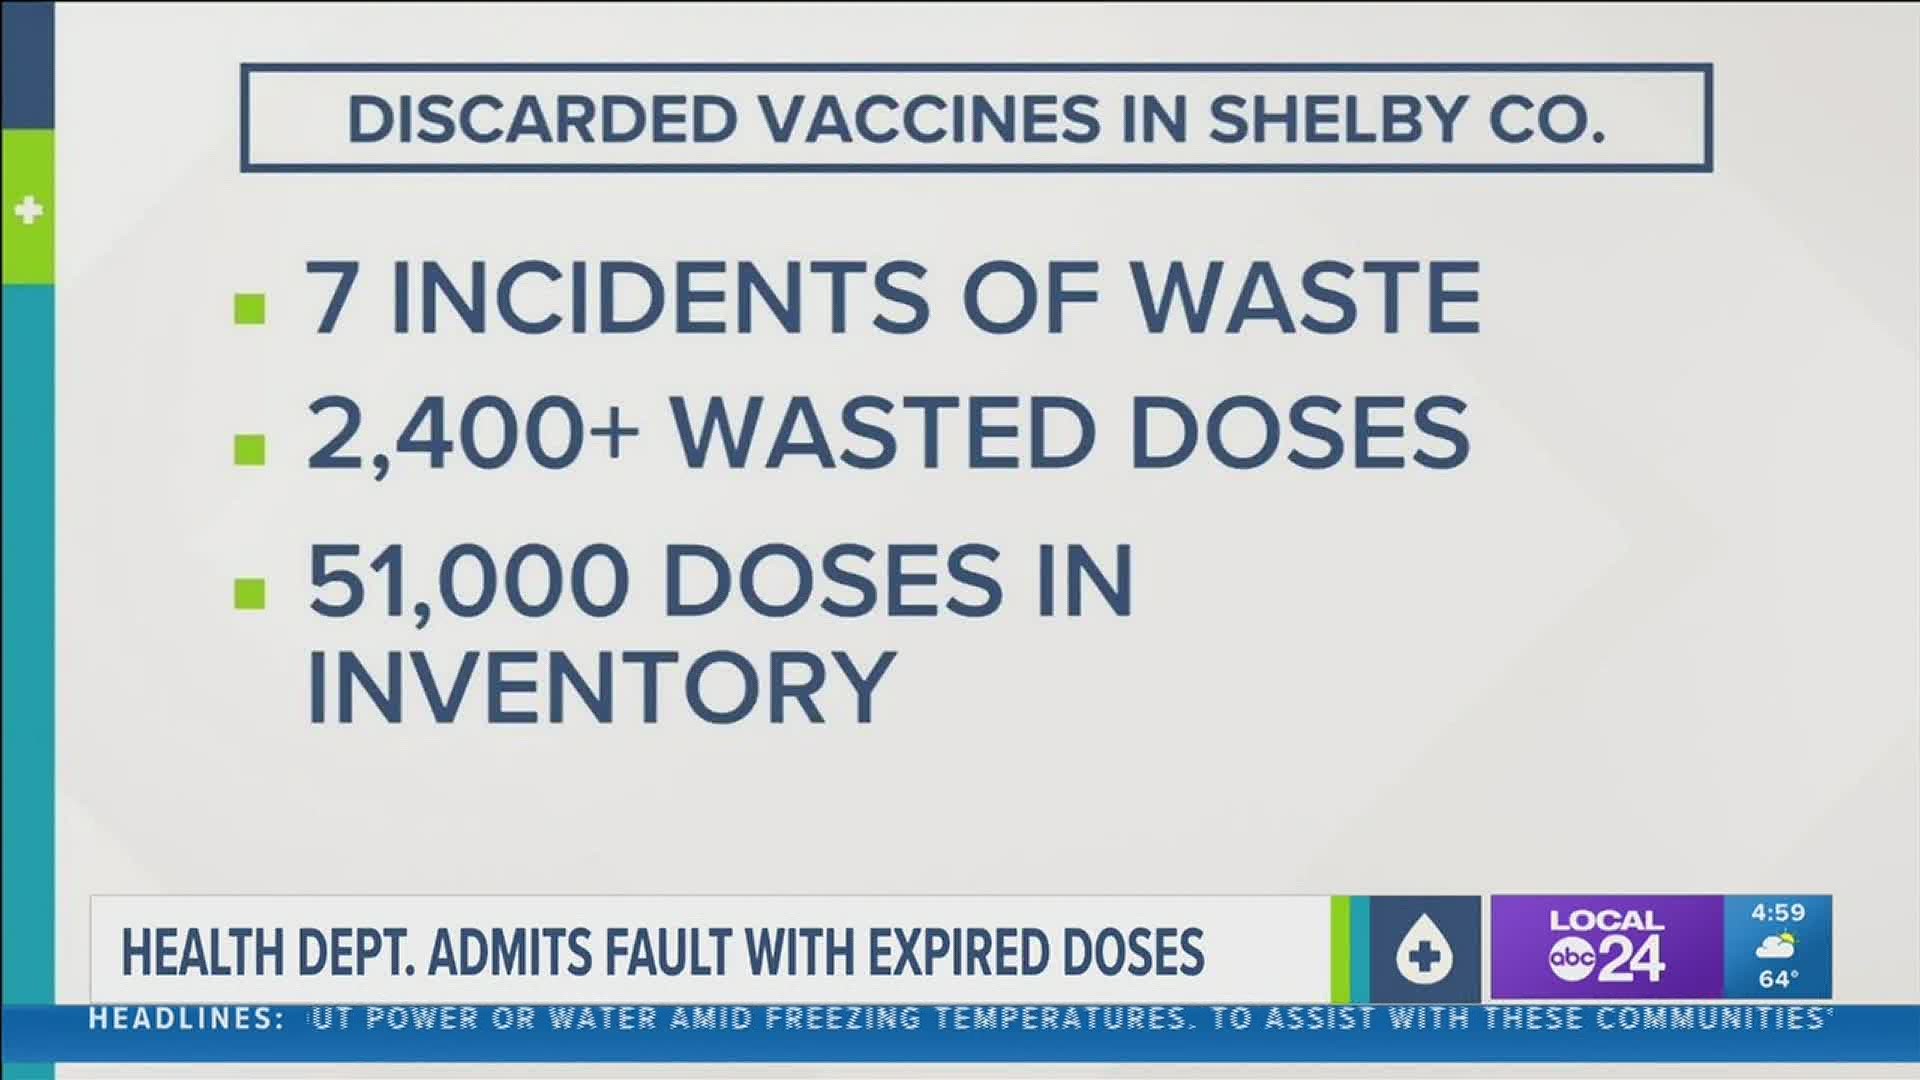 Shelby County Health Department admitted to mishandling its vaccination program.